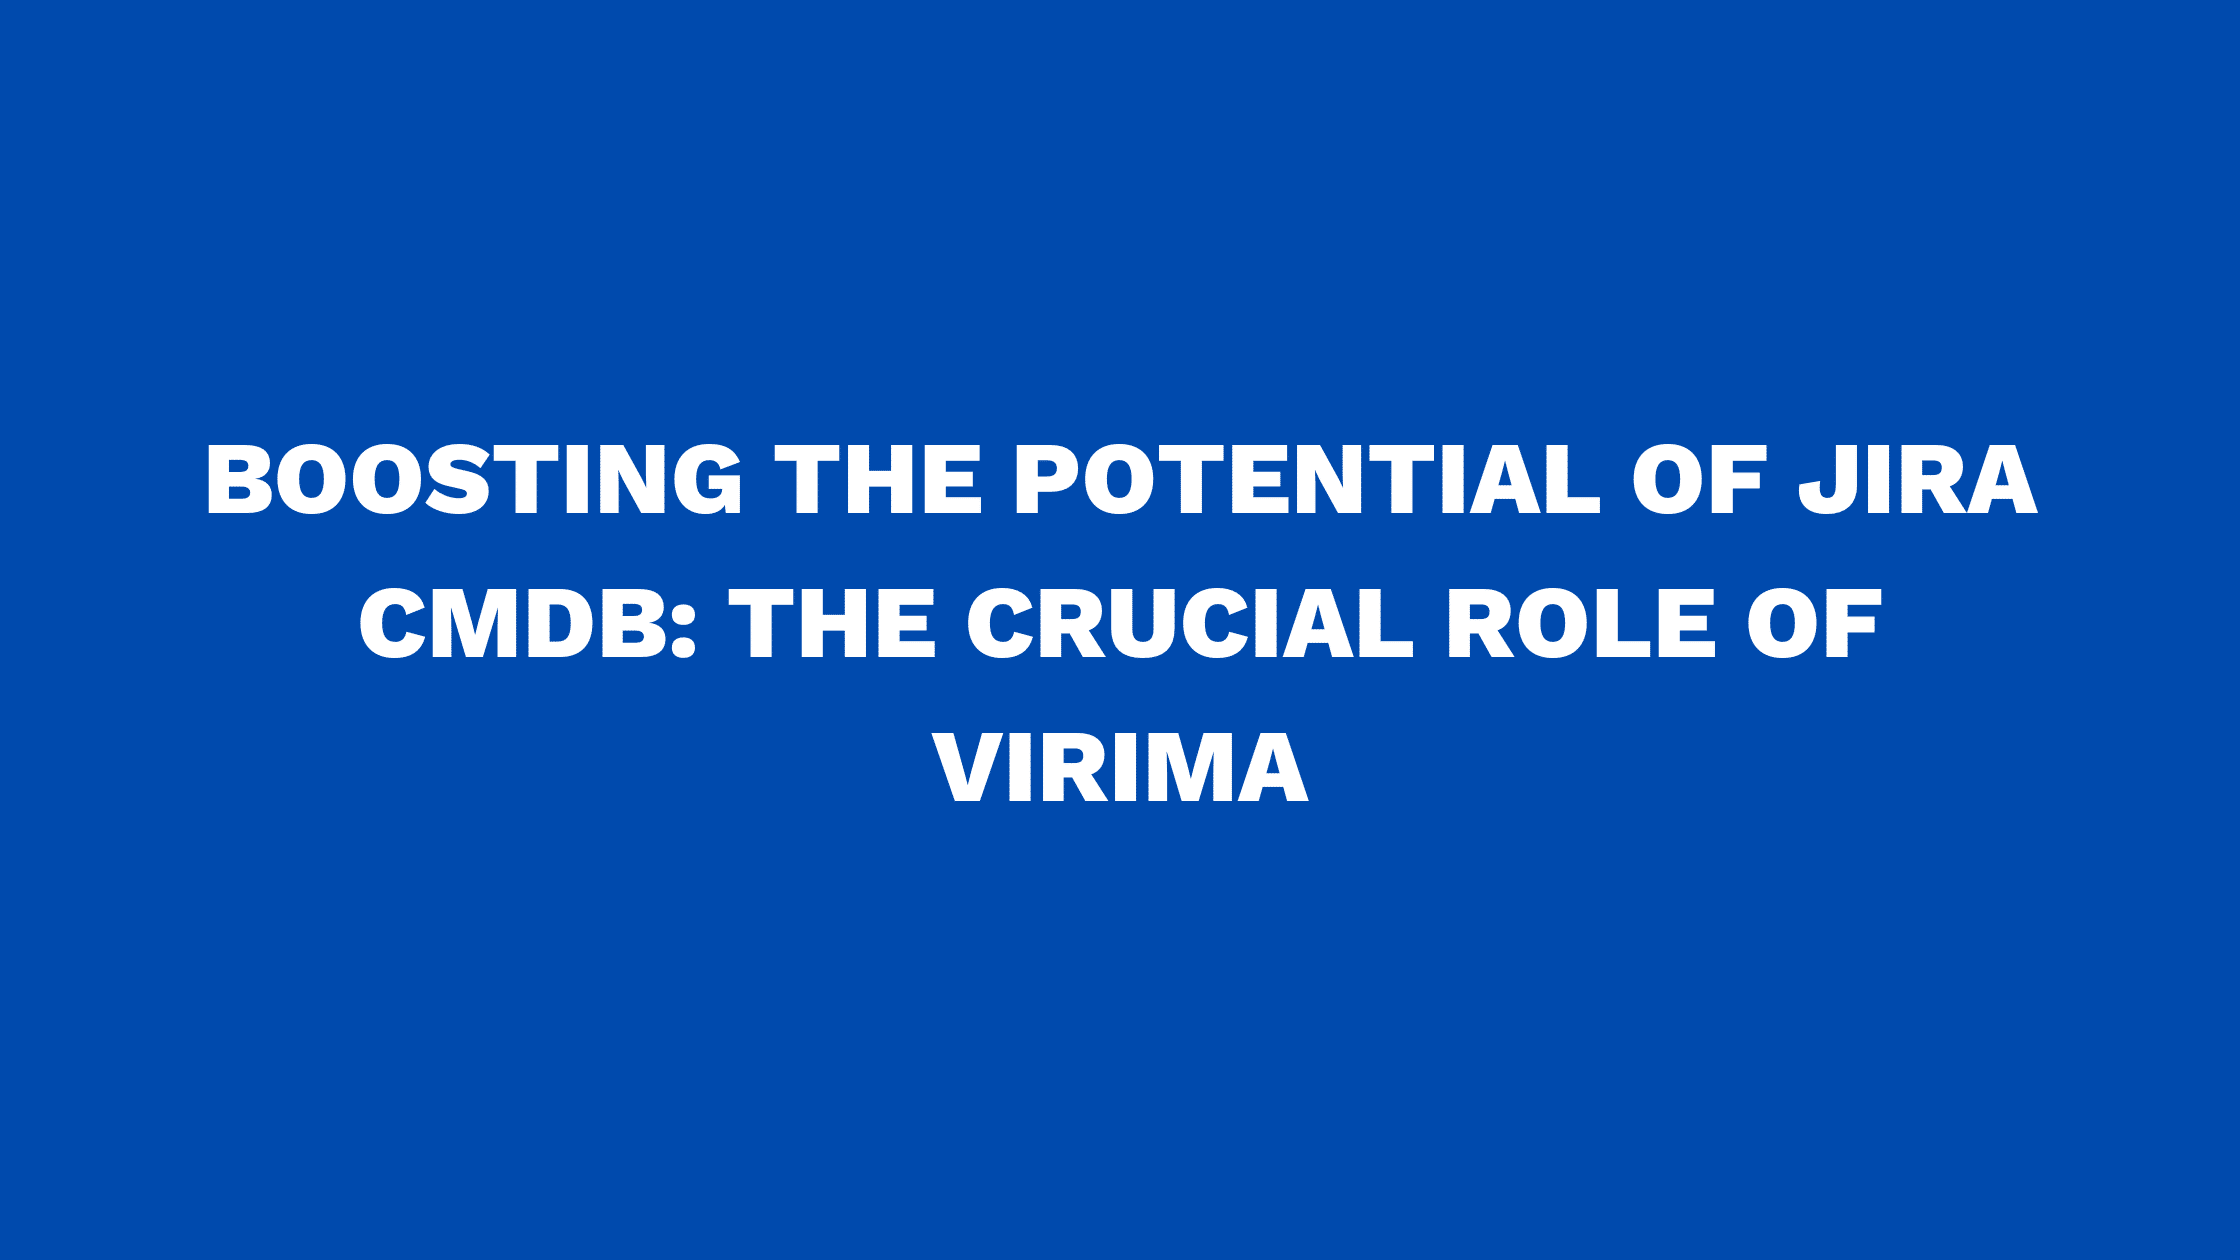 Boosting the potential of Jira CMDB: The crucial role of Virima